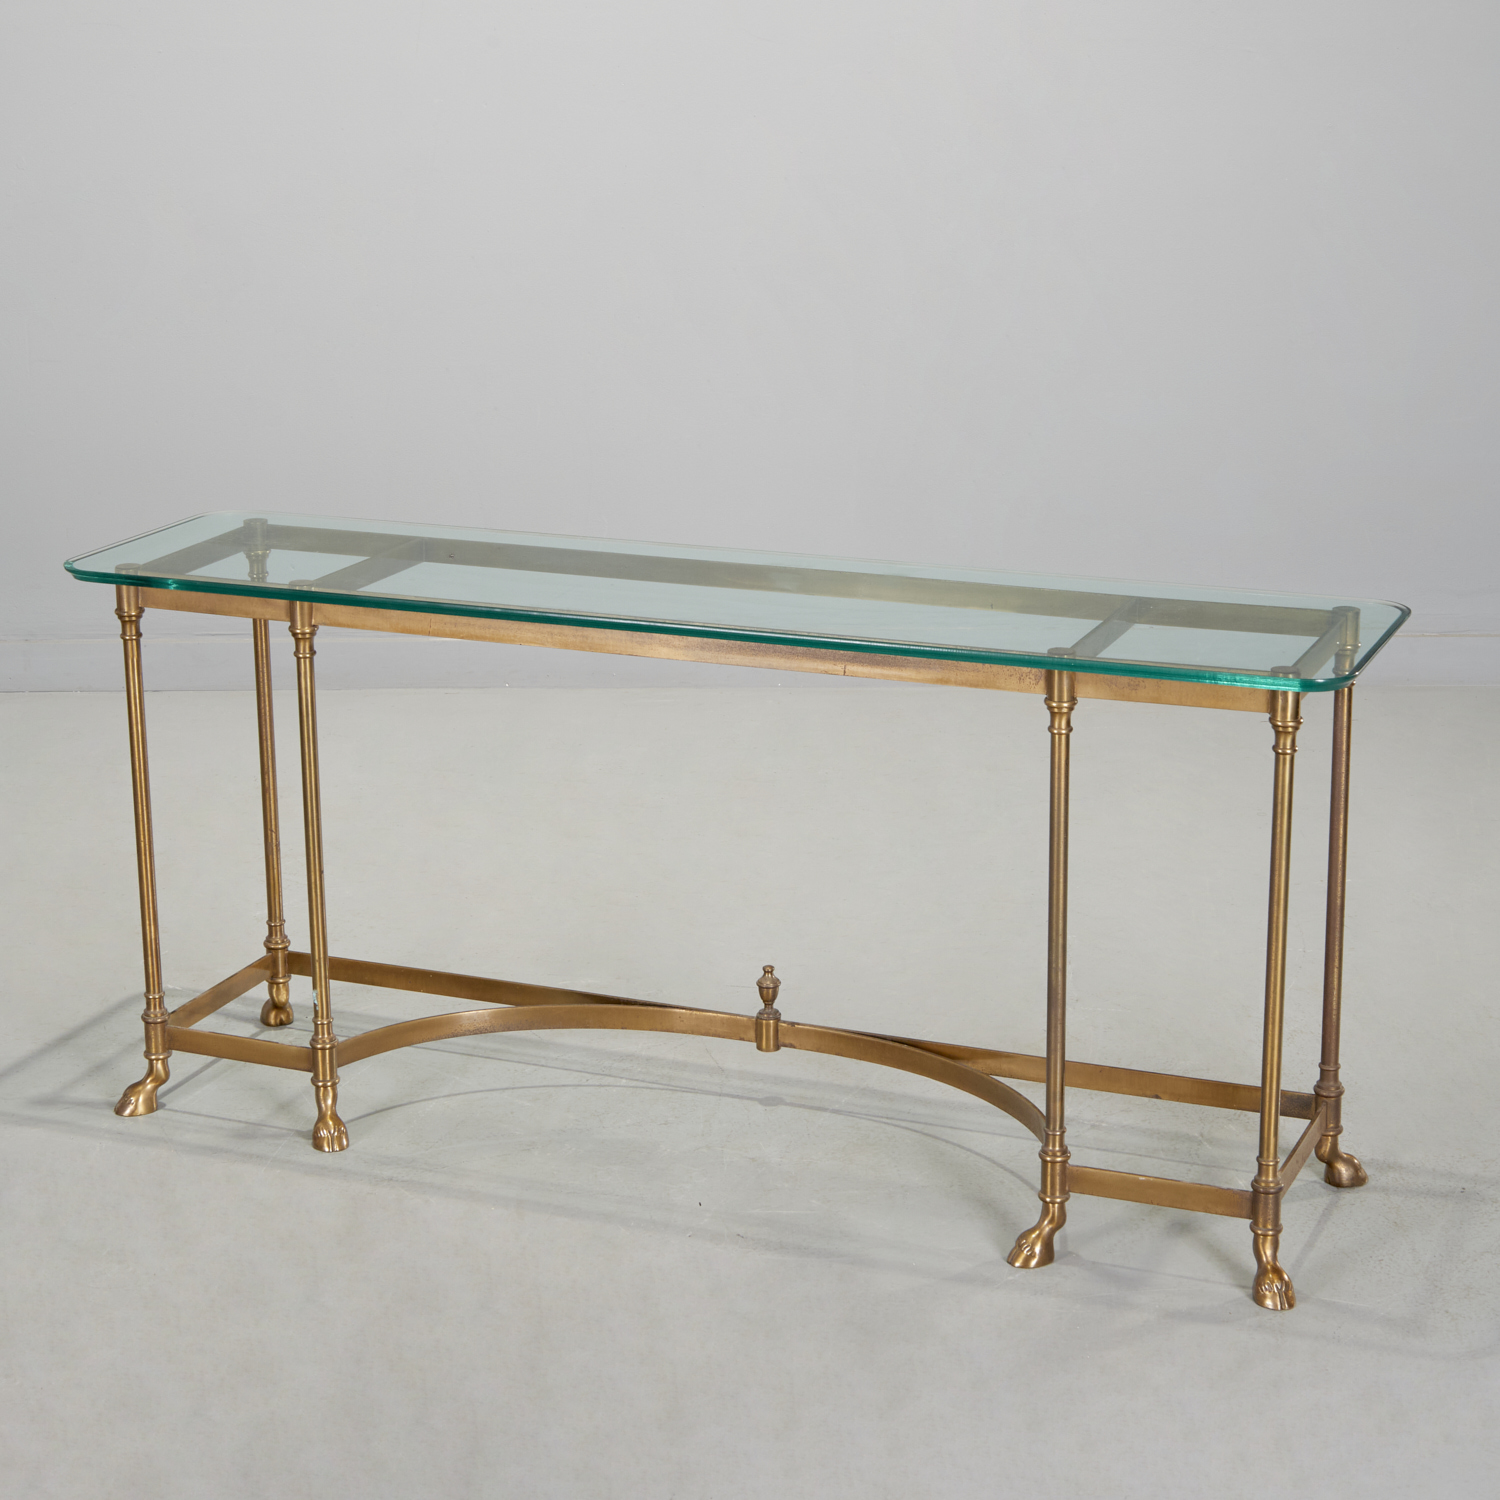 LABARGE BRASS AND GLASS CONSOLE 30bf04